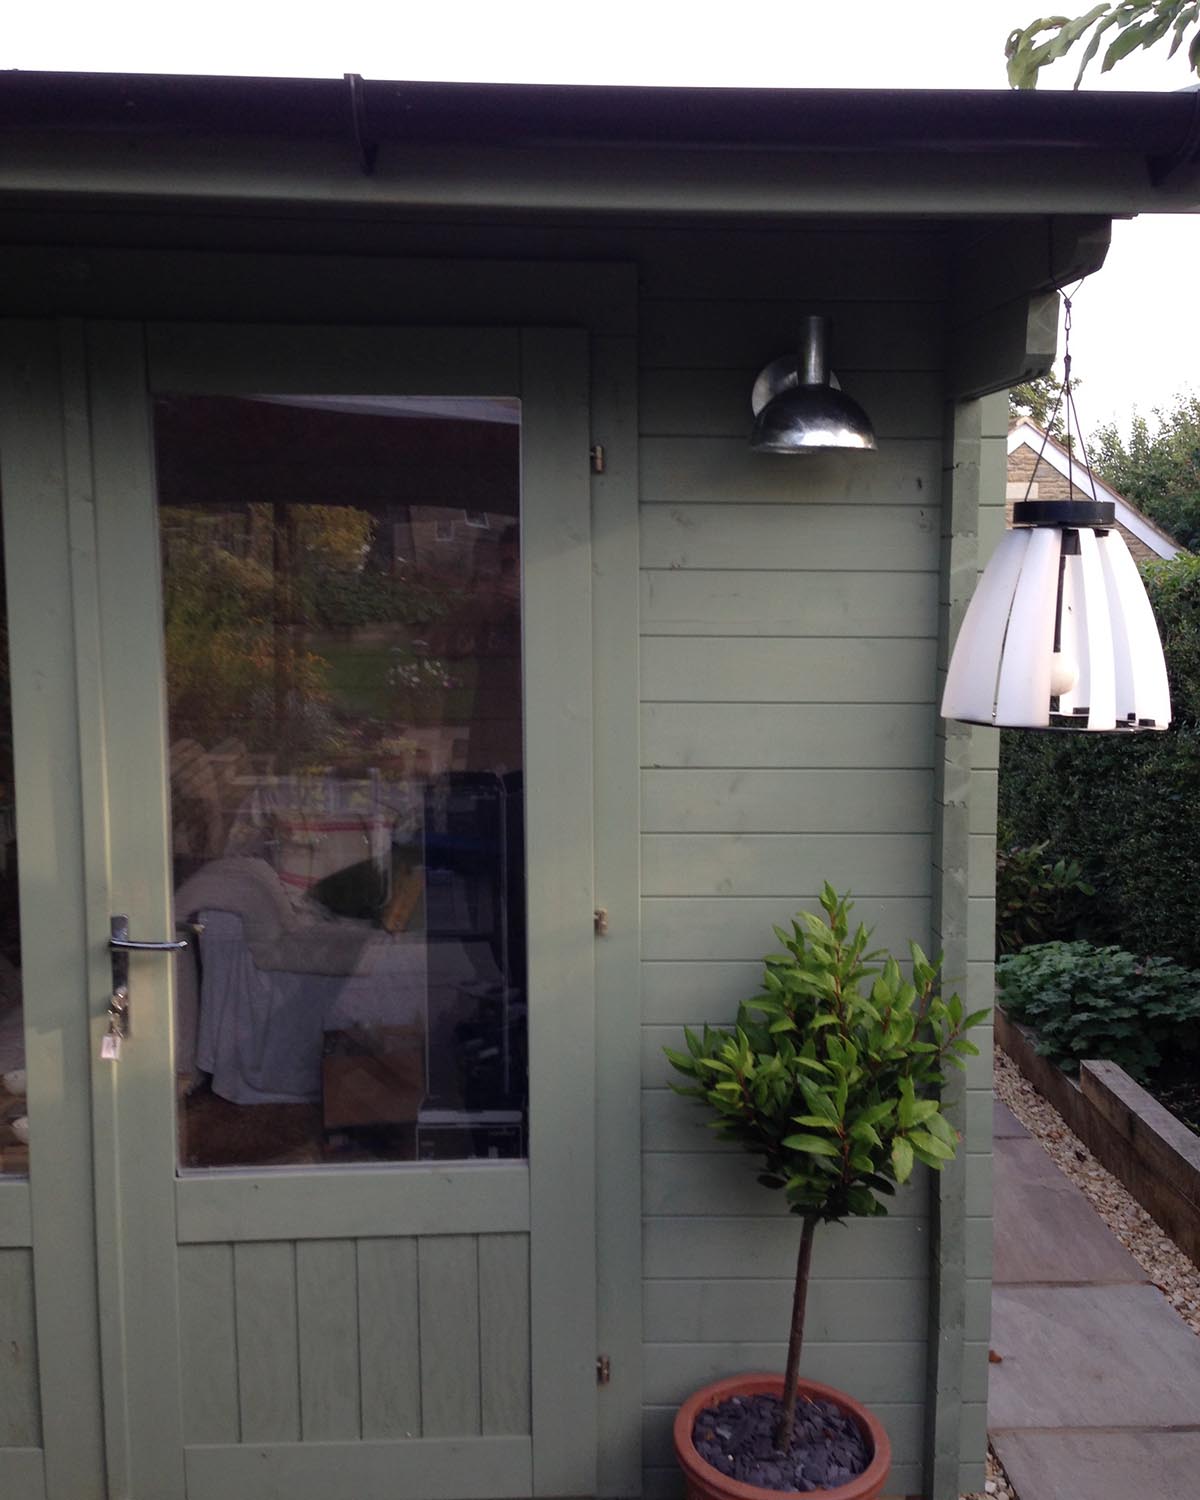 Green garden shed with light. NBG Digital Home. Electric Vehicle chargers, Solar and Heat Pumps, General Electrical Services in the South West.